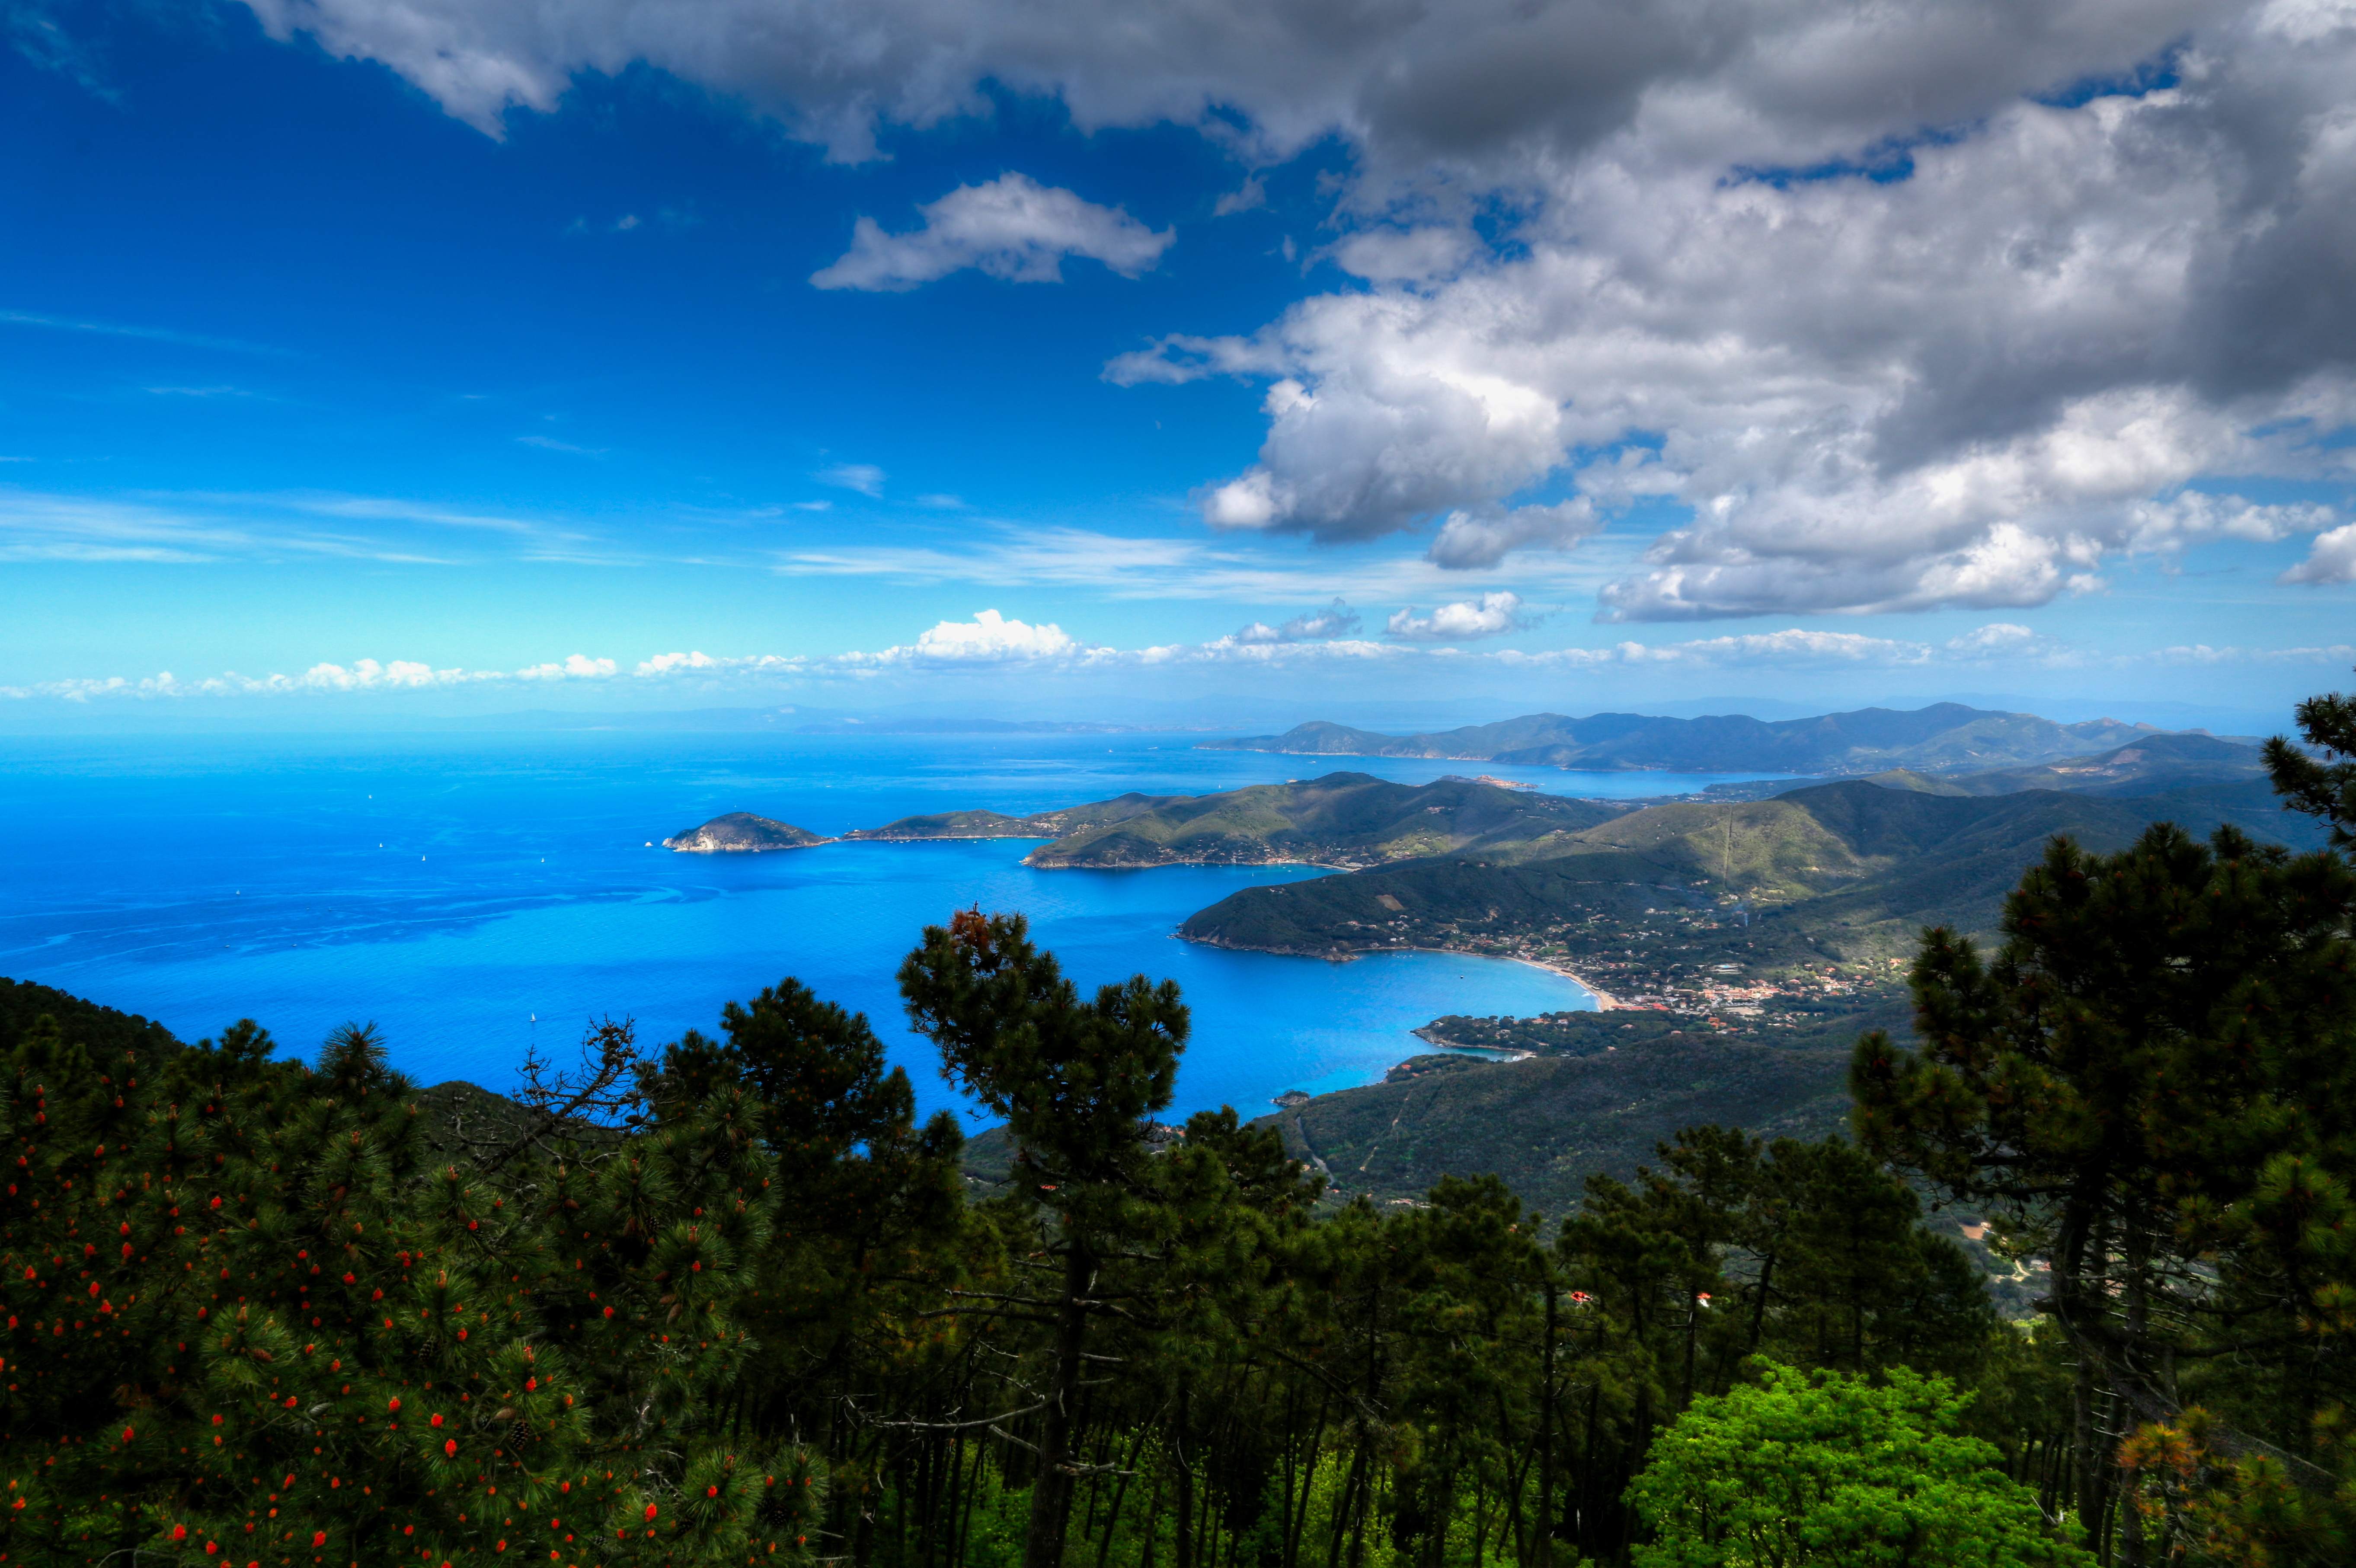 117812 download wallpaper landscape, nature, mountains, sea, italy, view from above screensavers and pictures for free